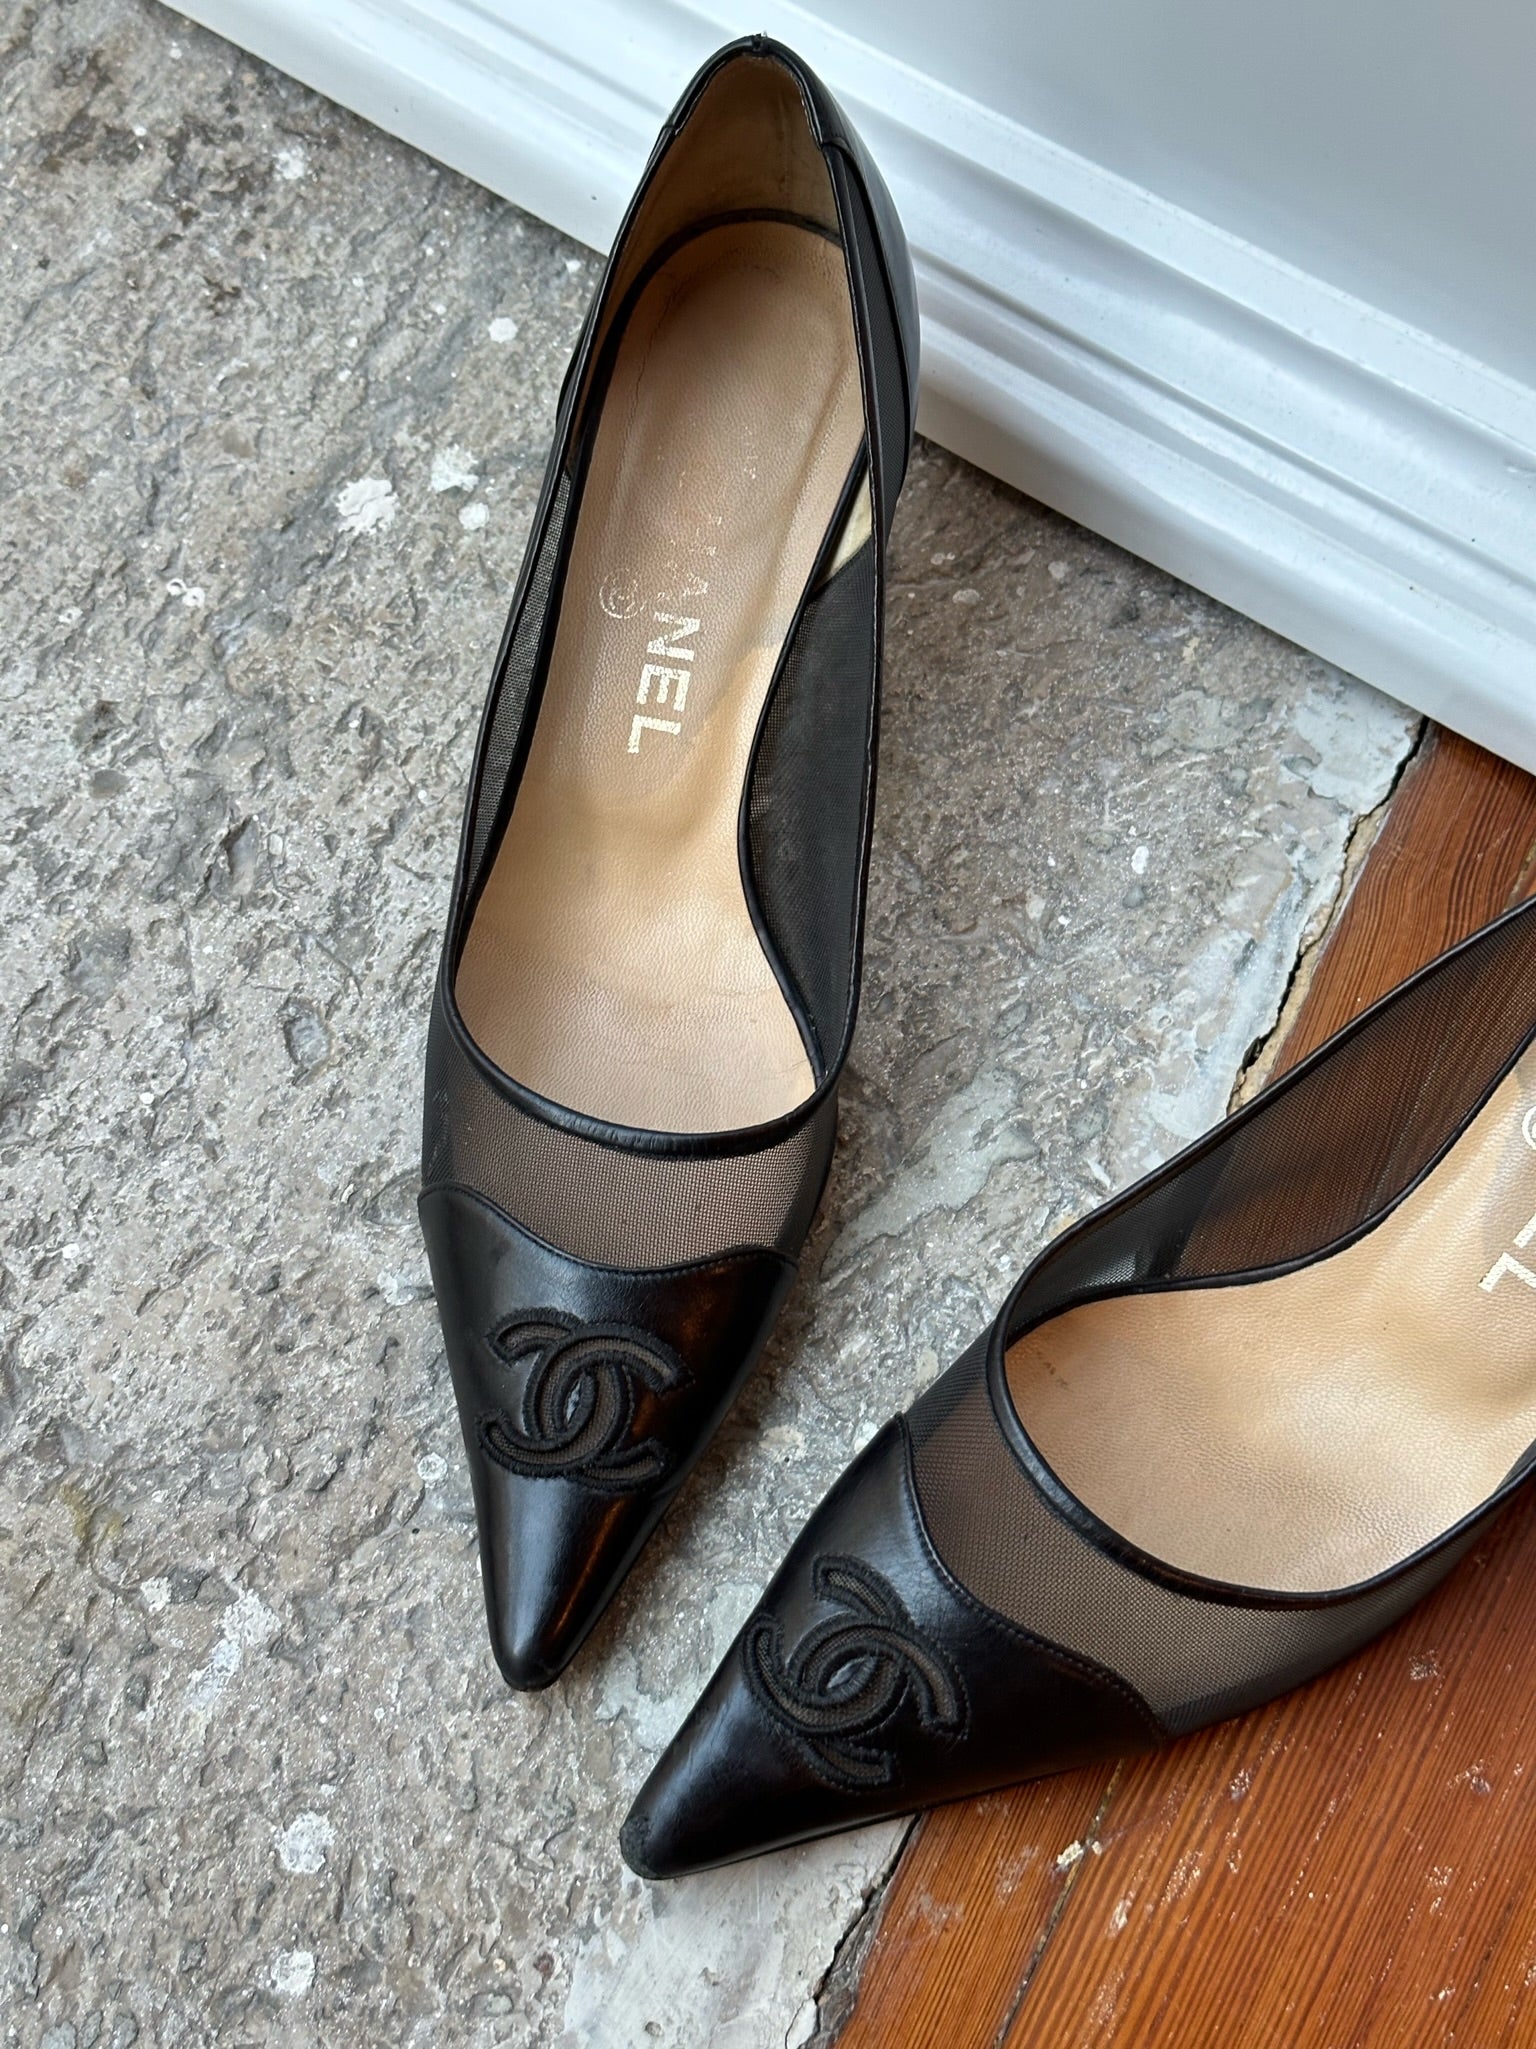 CHANEL Leather Heels and Mesh CC Logo Black Shoes Pump W/Box - Chelsea  Vintage Couture